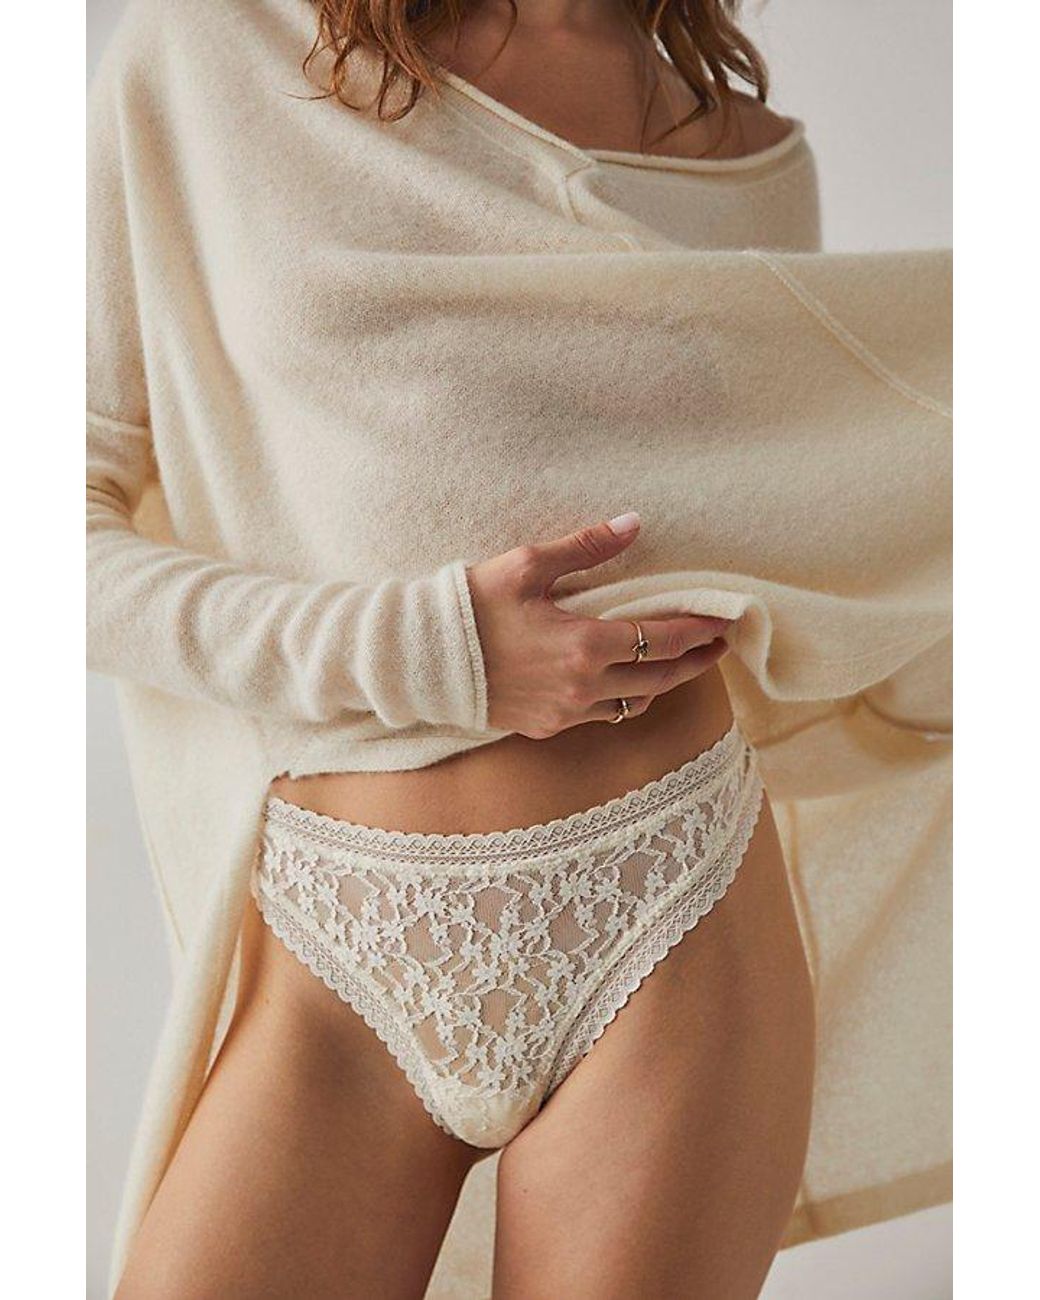 Free People Daisy Lace Thong Undies in Natural